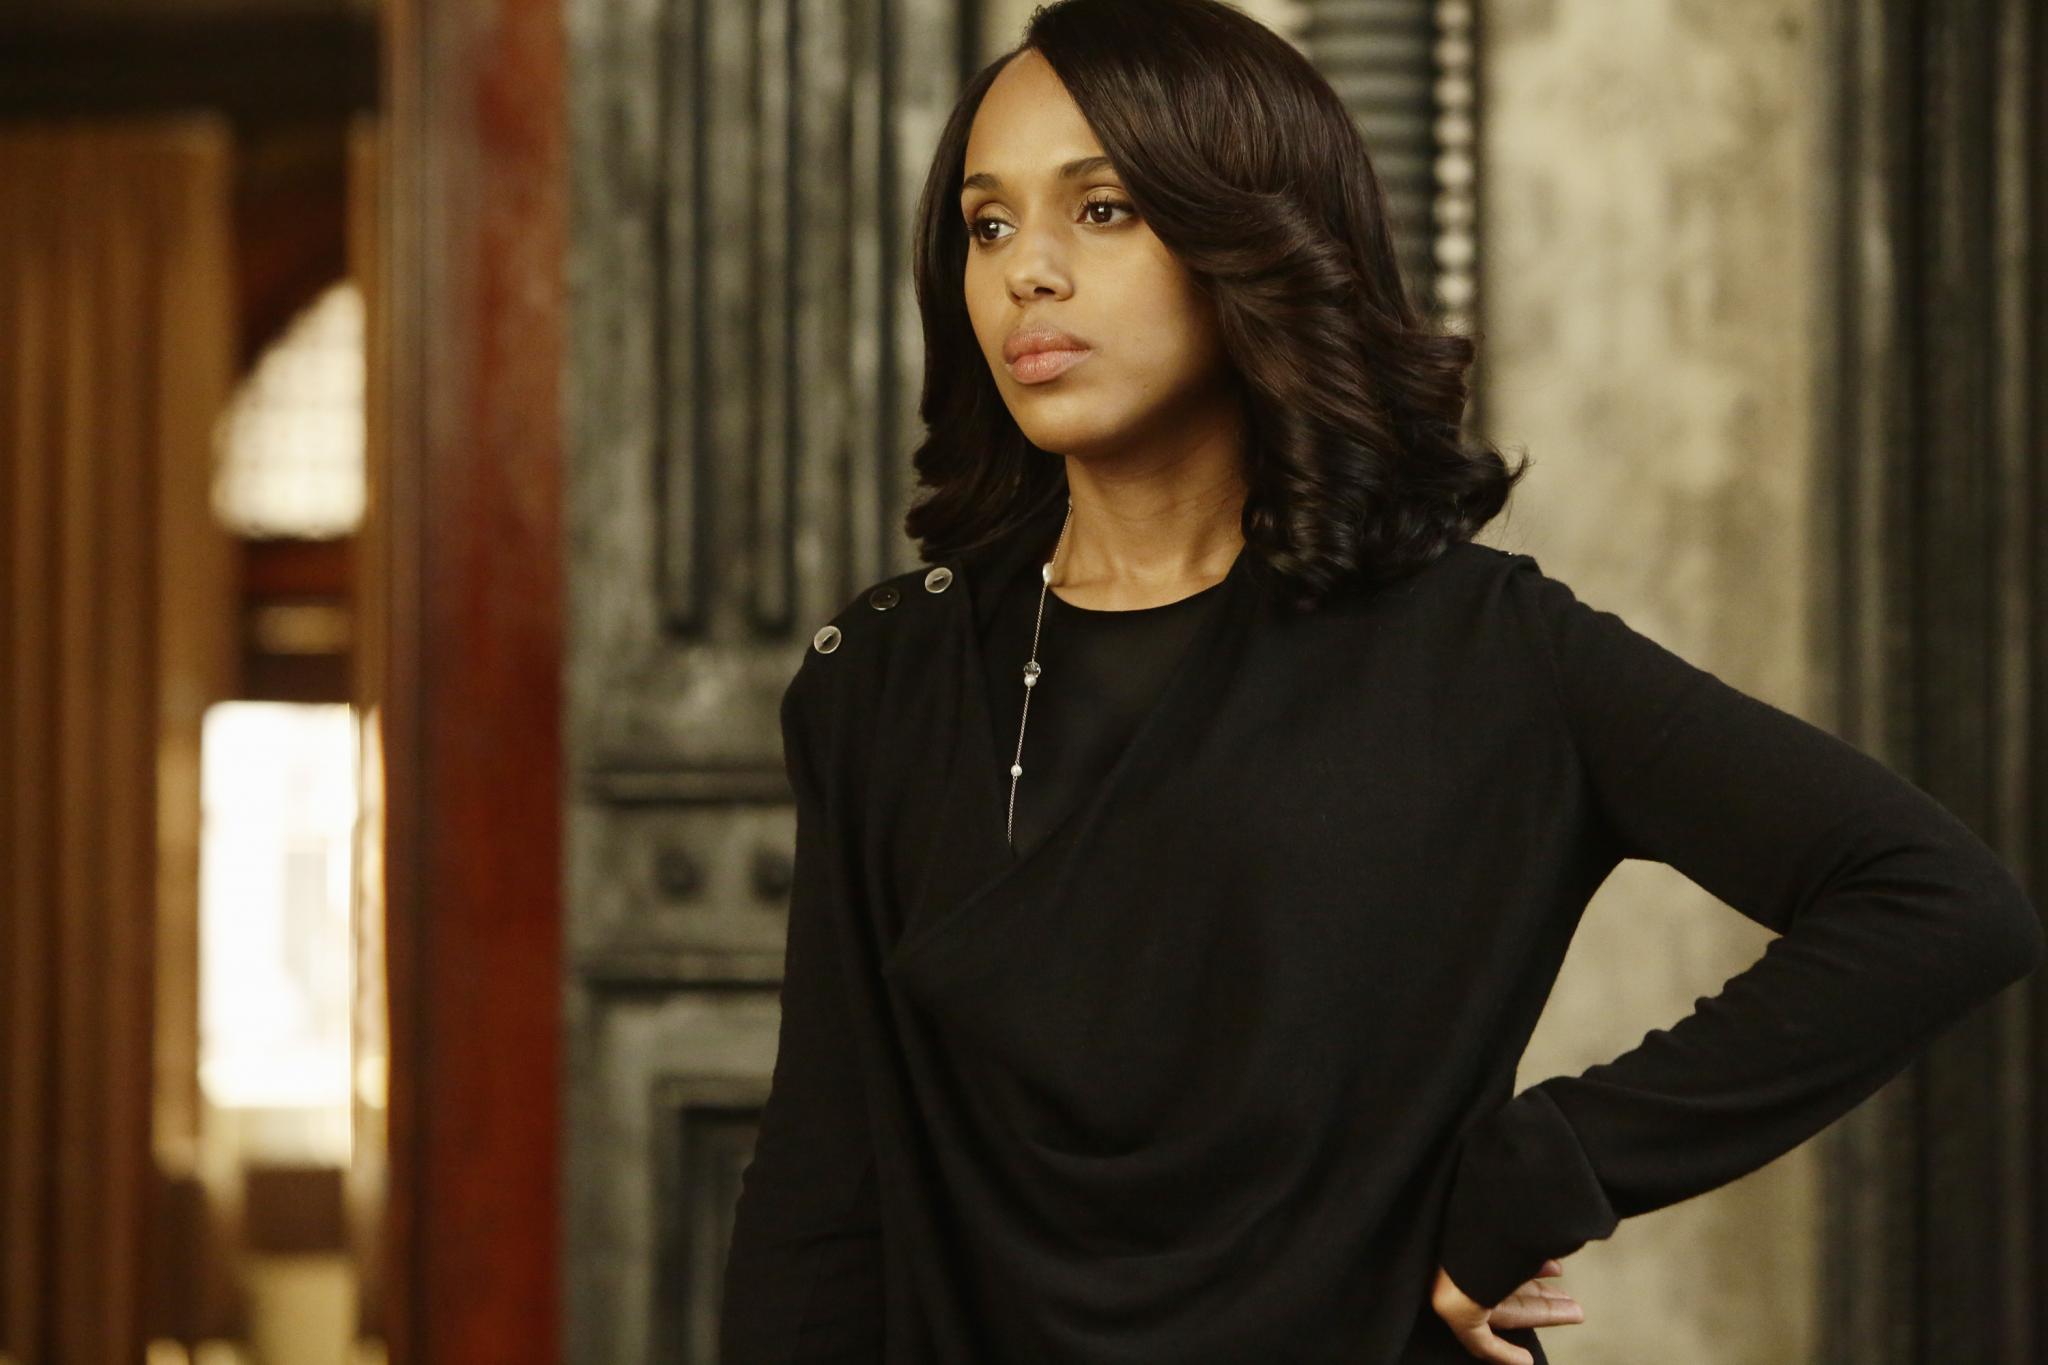 'Scandal' Drops Season 5 Promo (And it Looks Steamier Than Ever!)
